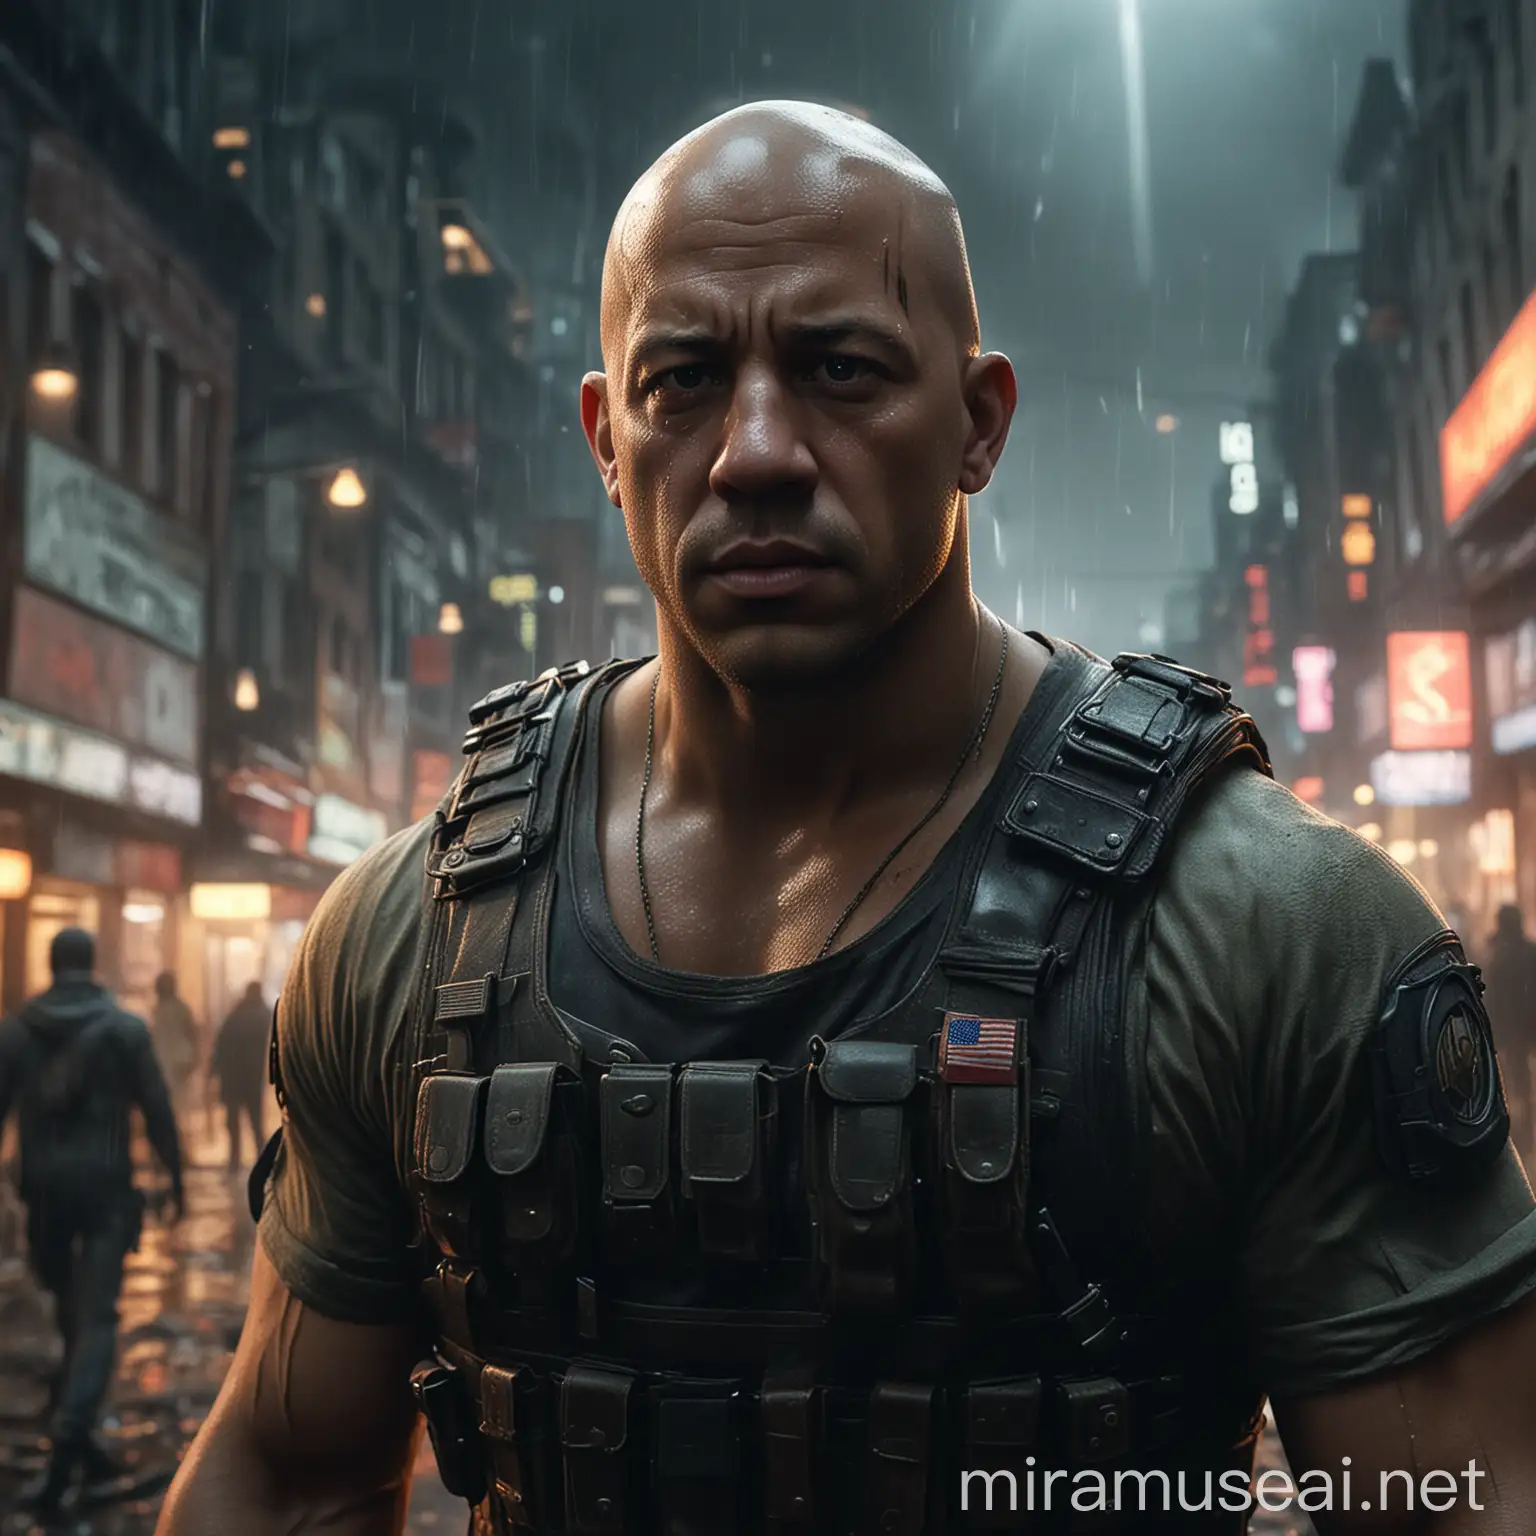 Vin Diesel in Hyperrealistic Tactical Attire Amidst Cinematic Cityscape